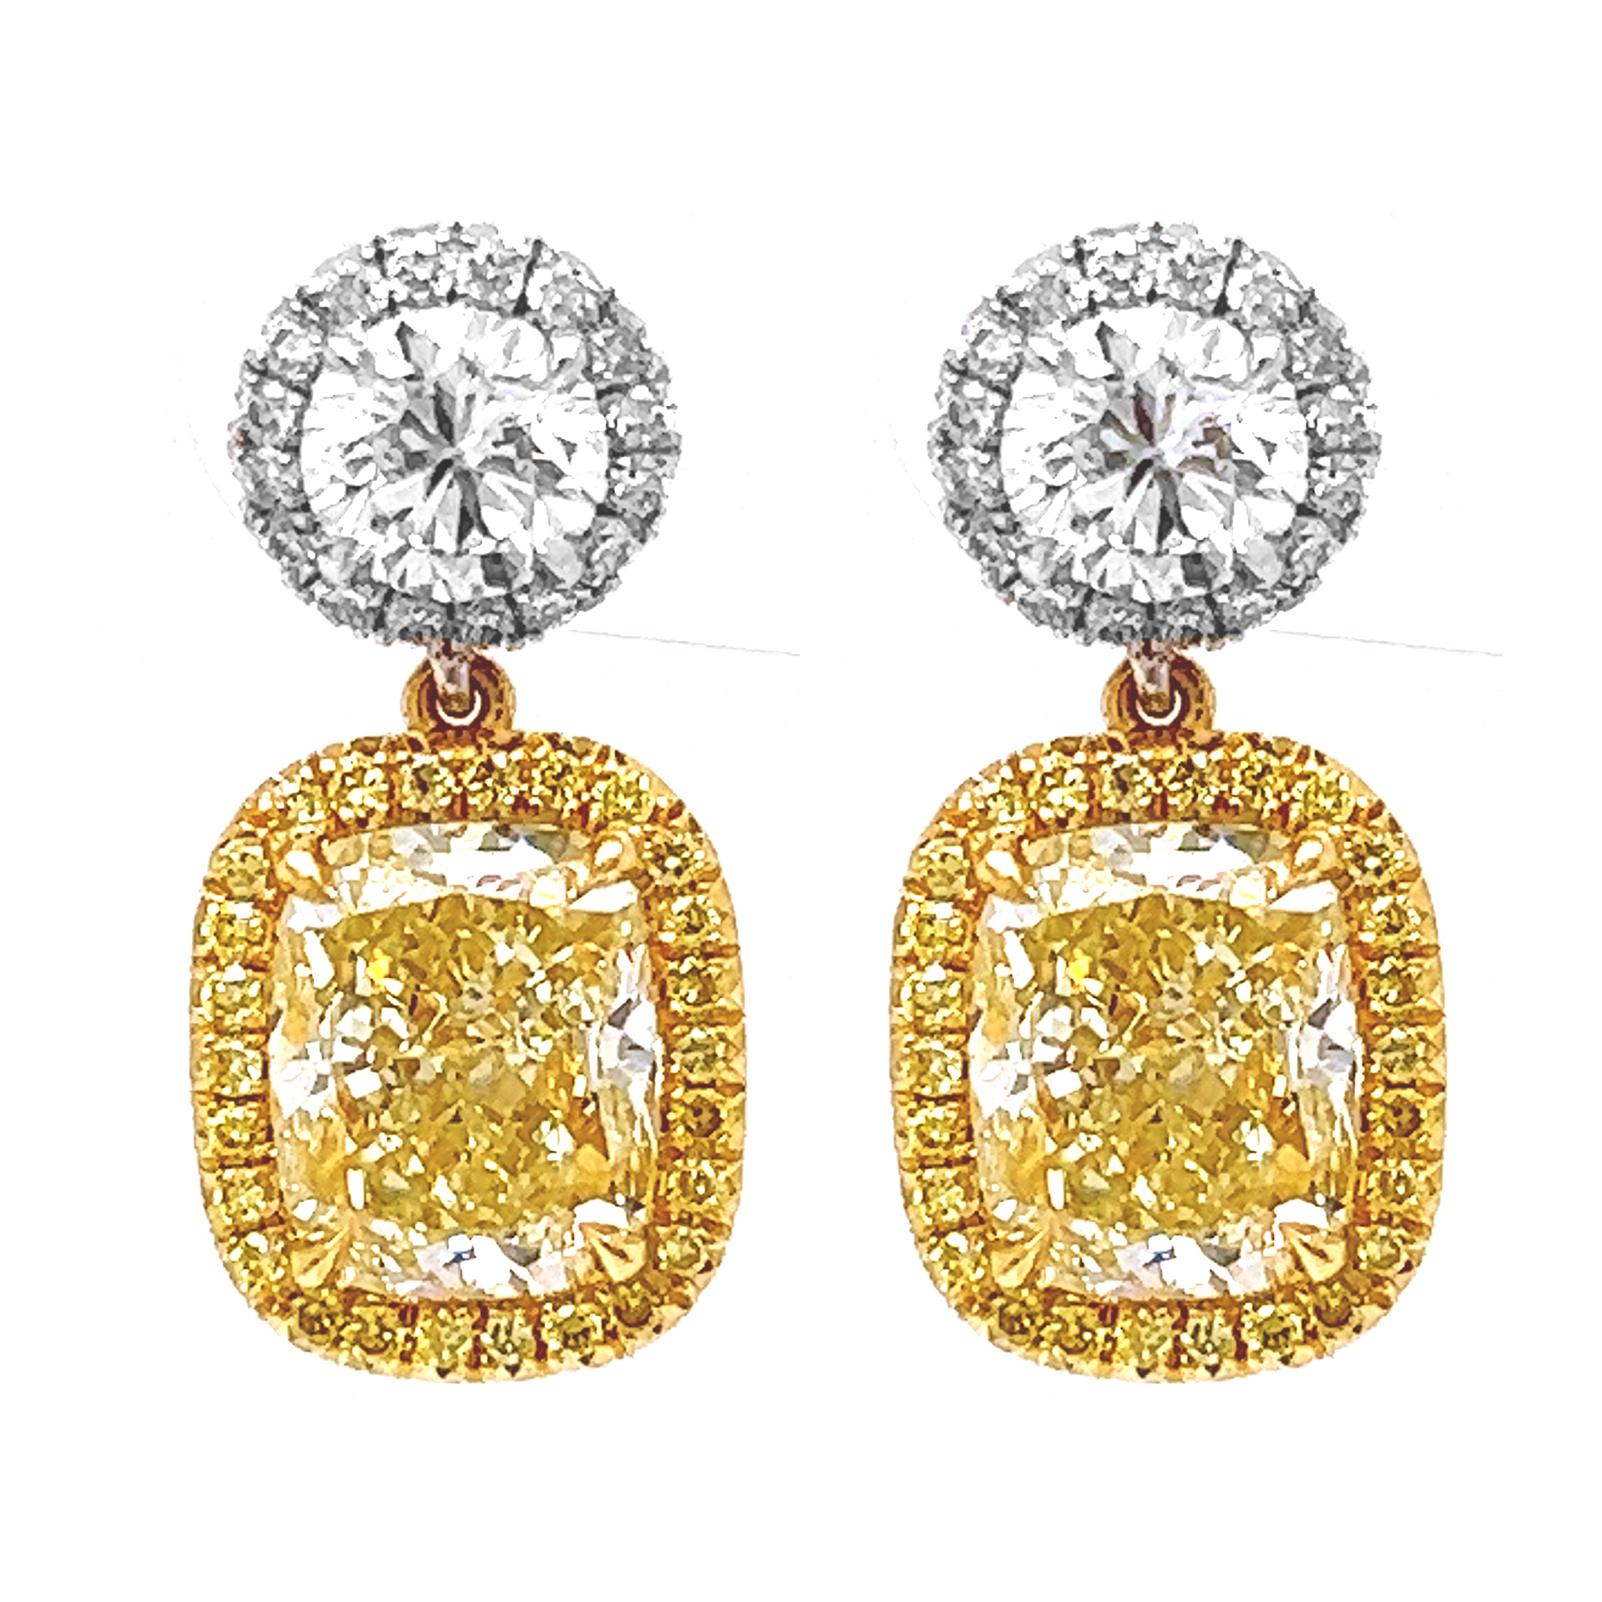 Exquisite 4.42 Carat Total Weight Natural Mined Fancy Yellow Diamond Halo Cocktail Earrings - 18KT Gold

Description:
Elevate your elegance with our Exquisite 4.42 Carat Total Weight Natural Mined Fancy Yellow Diamond Halo Cocktail Earrings,